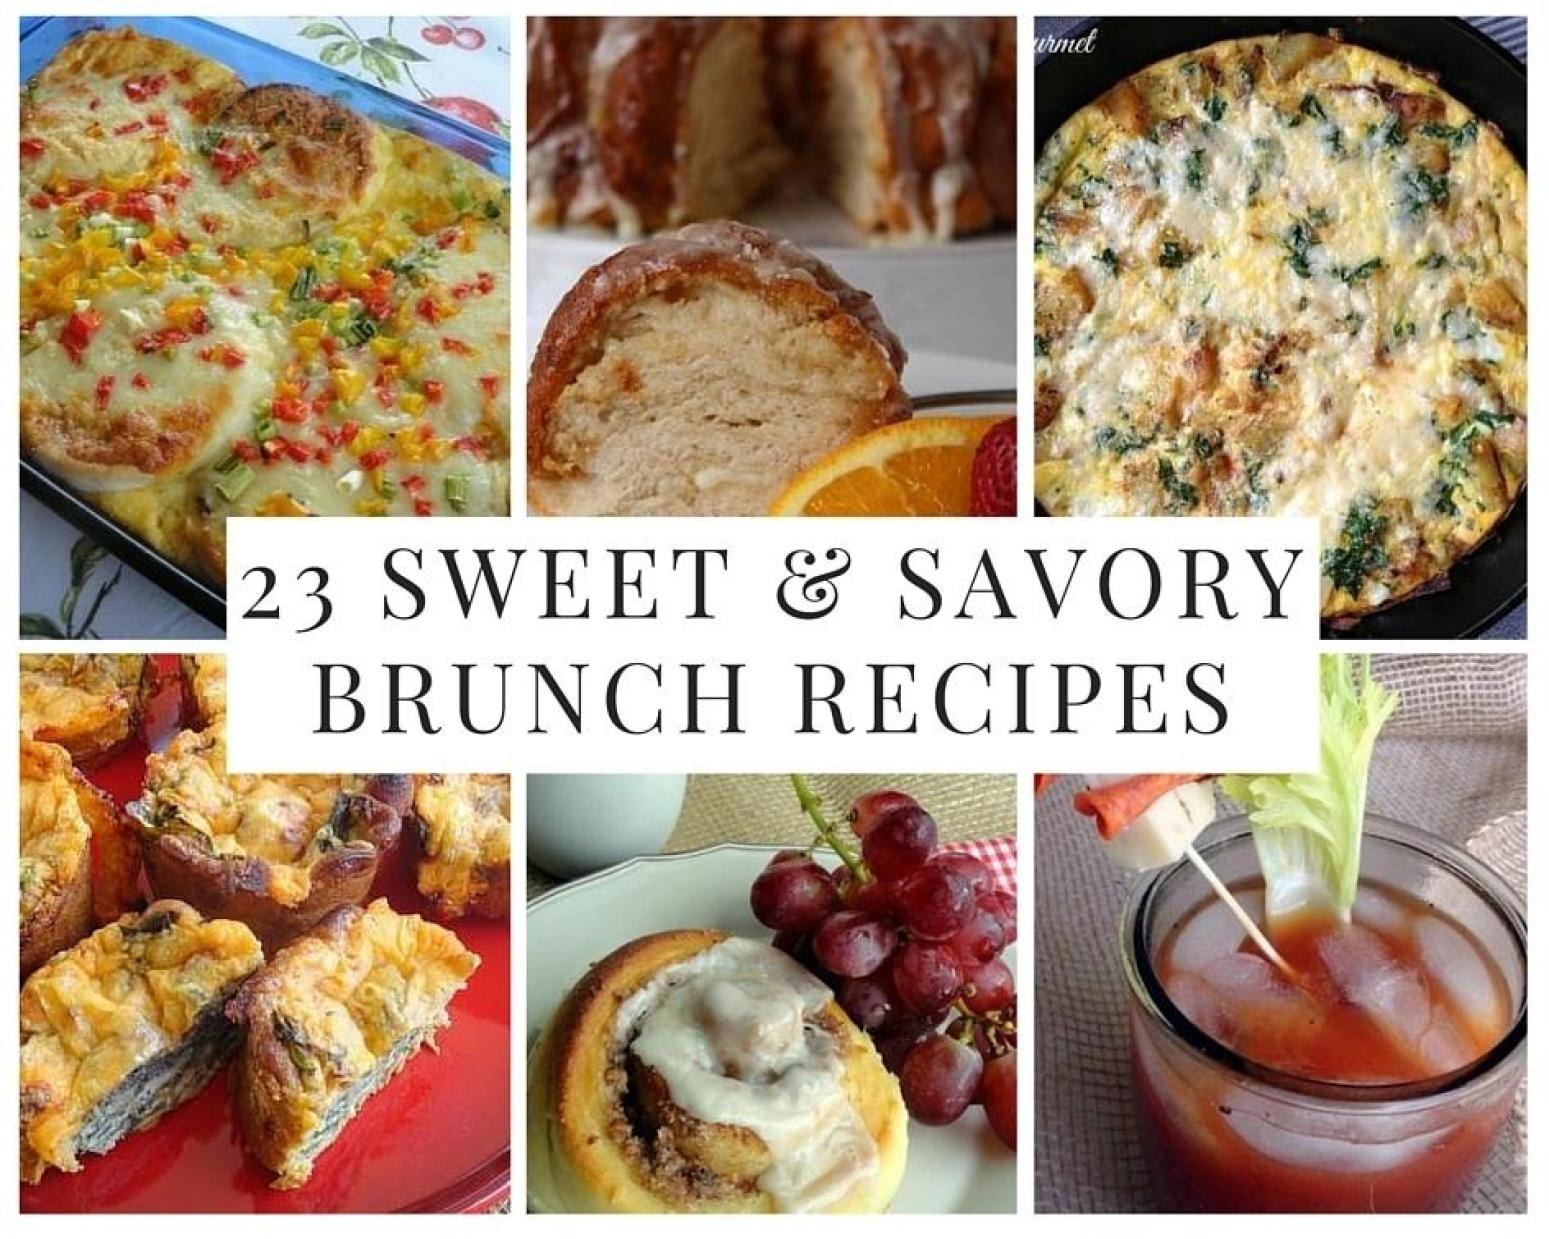 23 Sweet & Savory Brunch Recipes - Just A Pinch